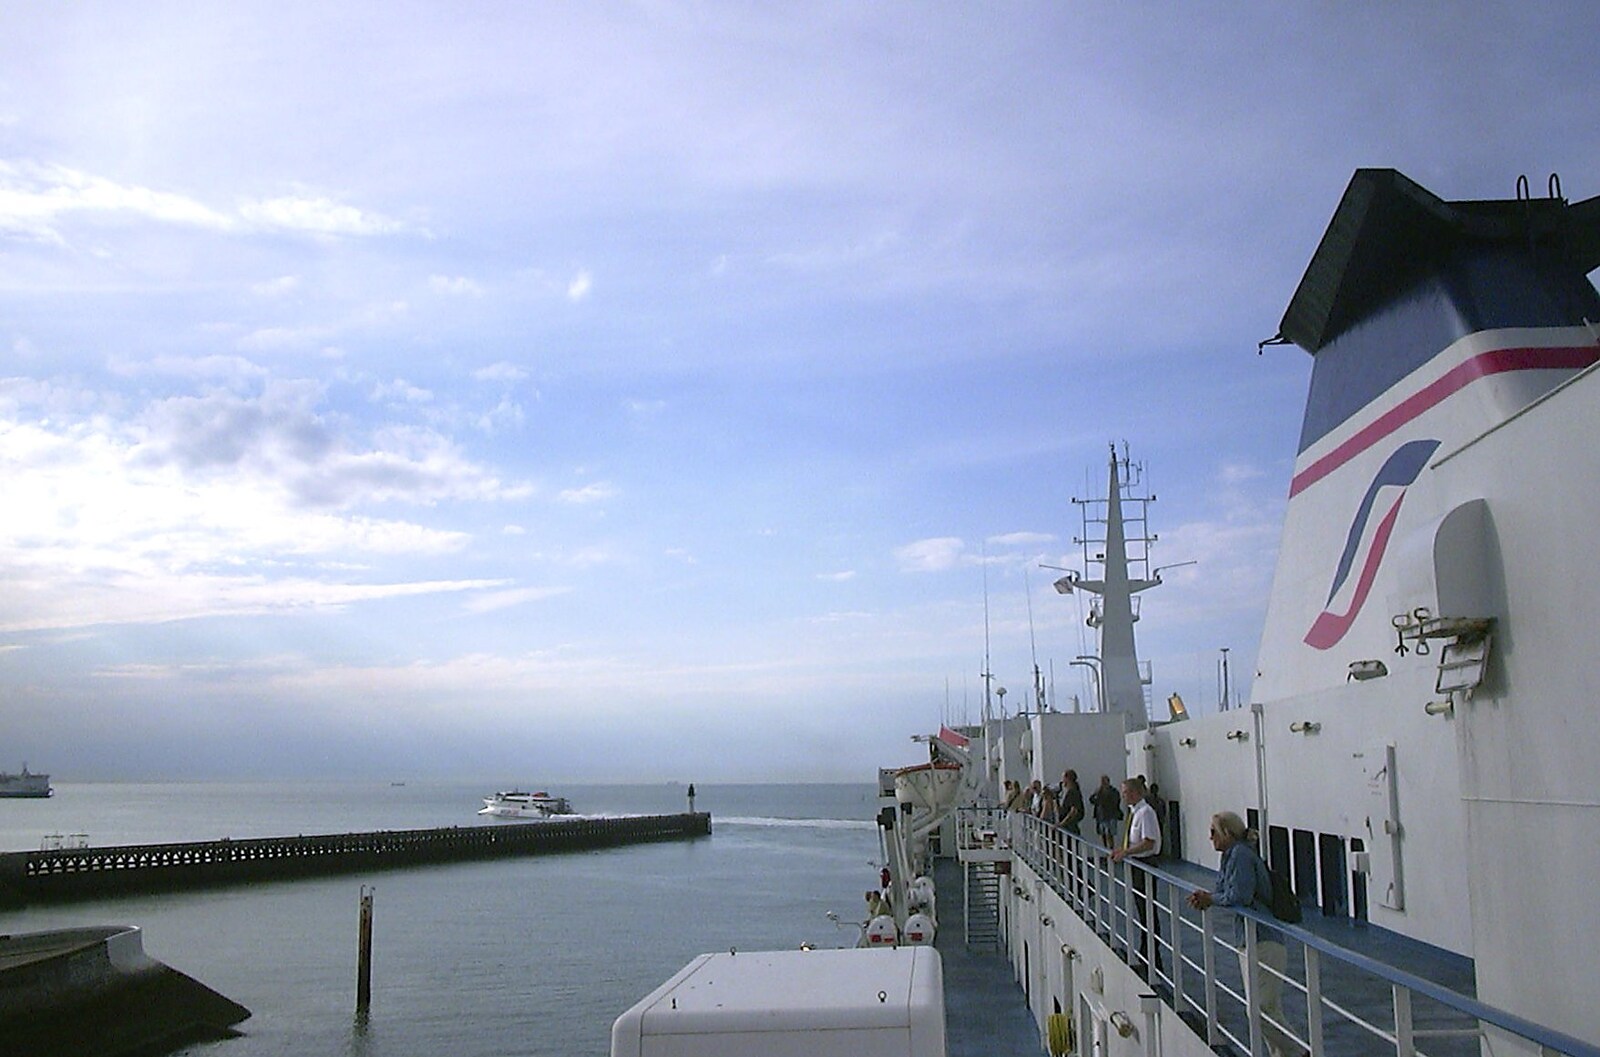 A view of the ferry from A Brome Swan Trip to Calais and the Battery Todt, Cap Gris Nez, France - 11th August 2004